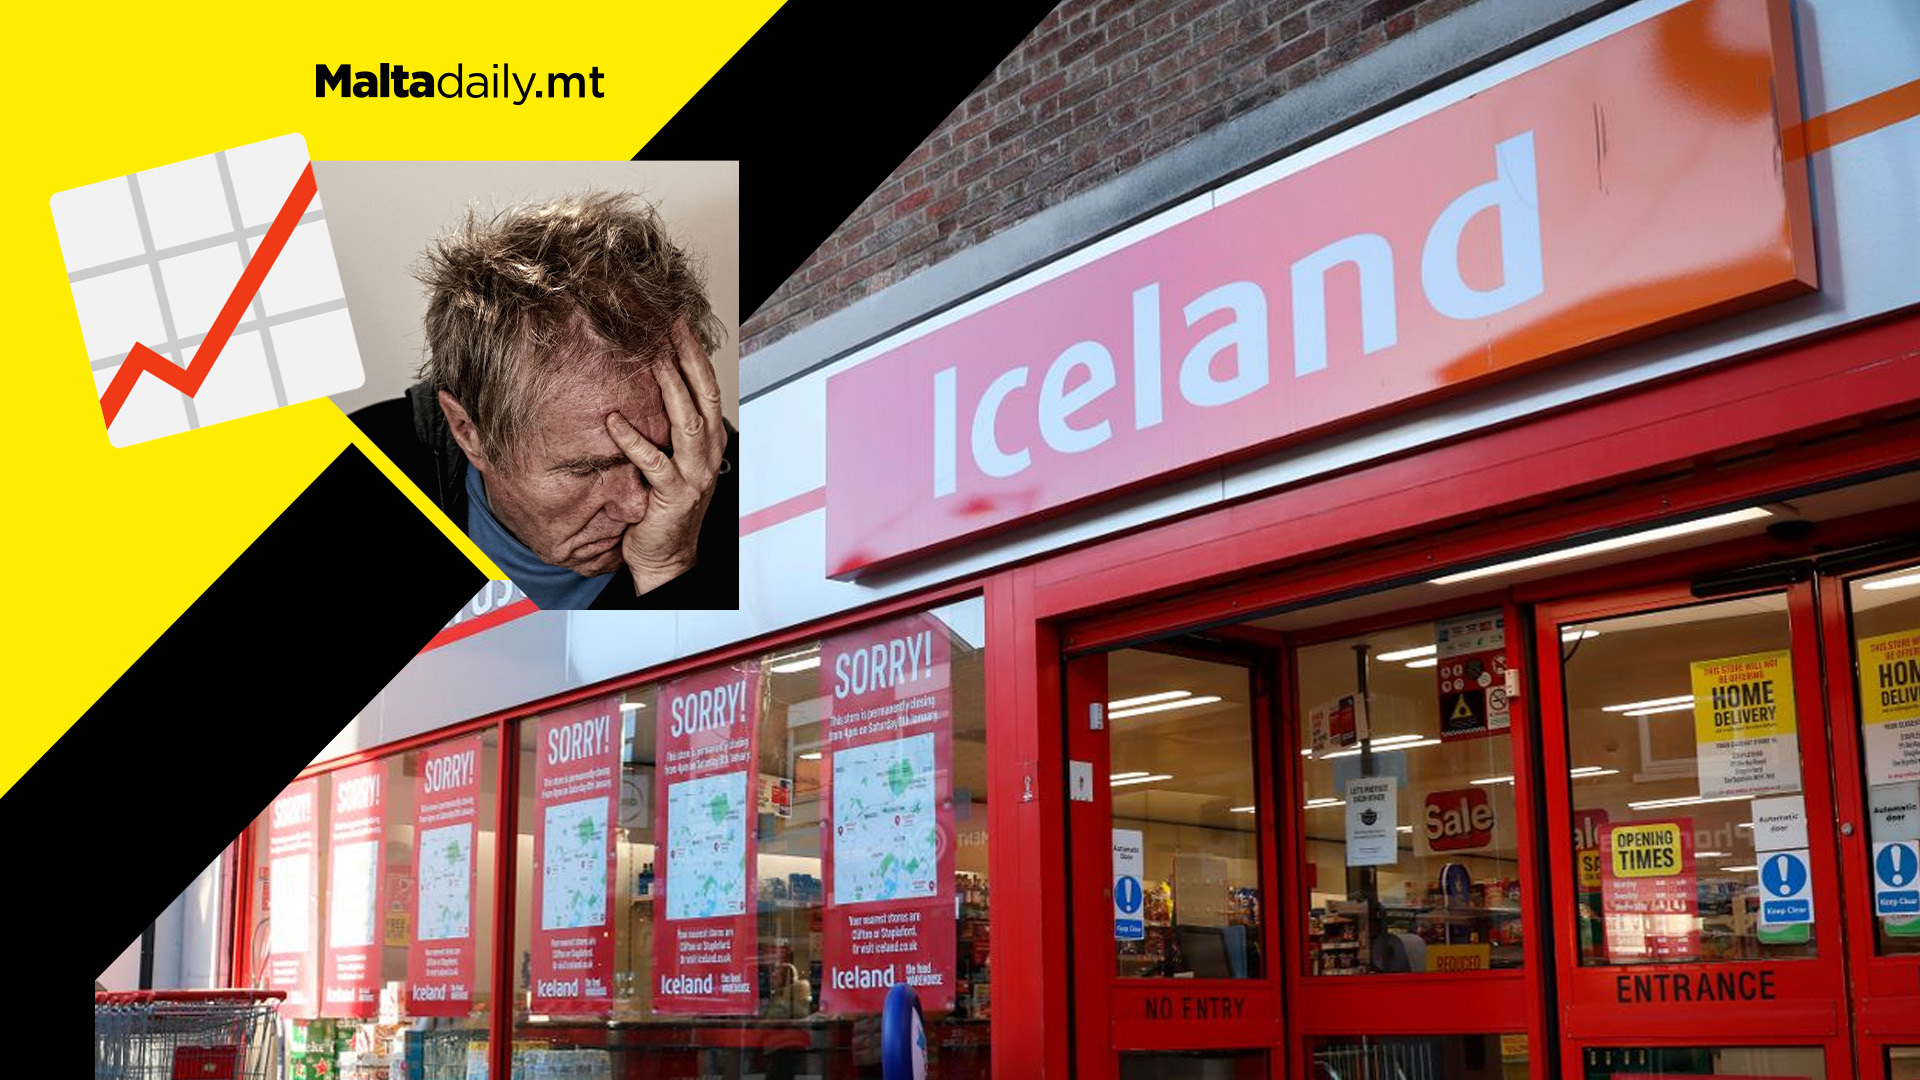 Iceland UK offering discount for shoppers over 60 to cope with cost of living increase